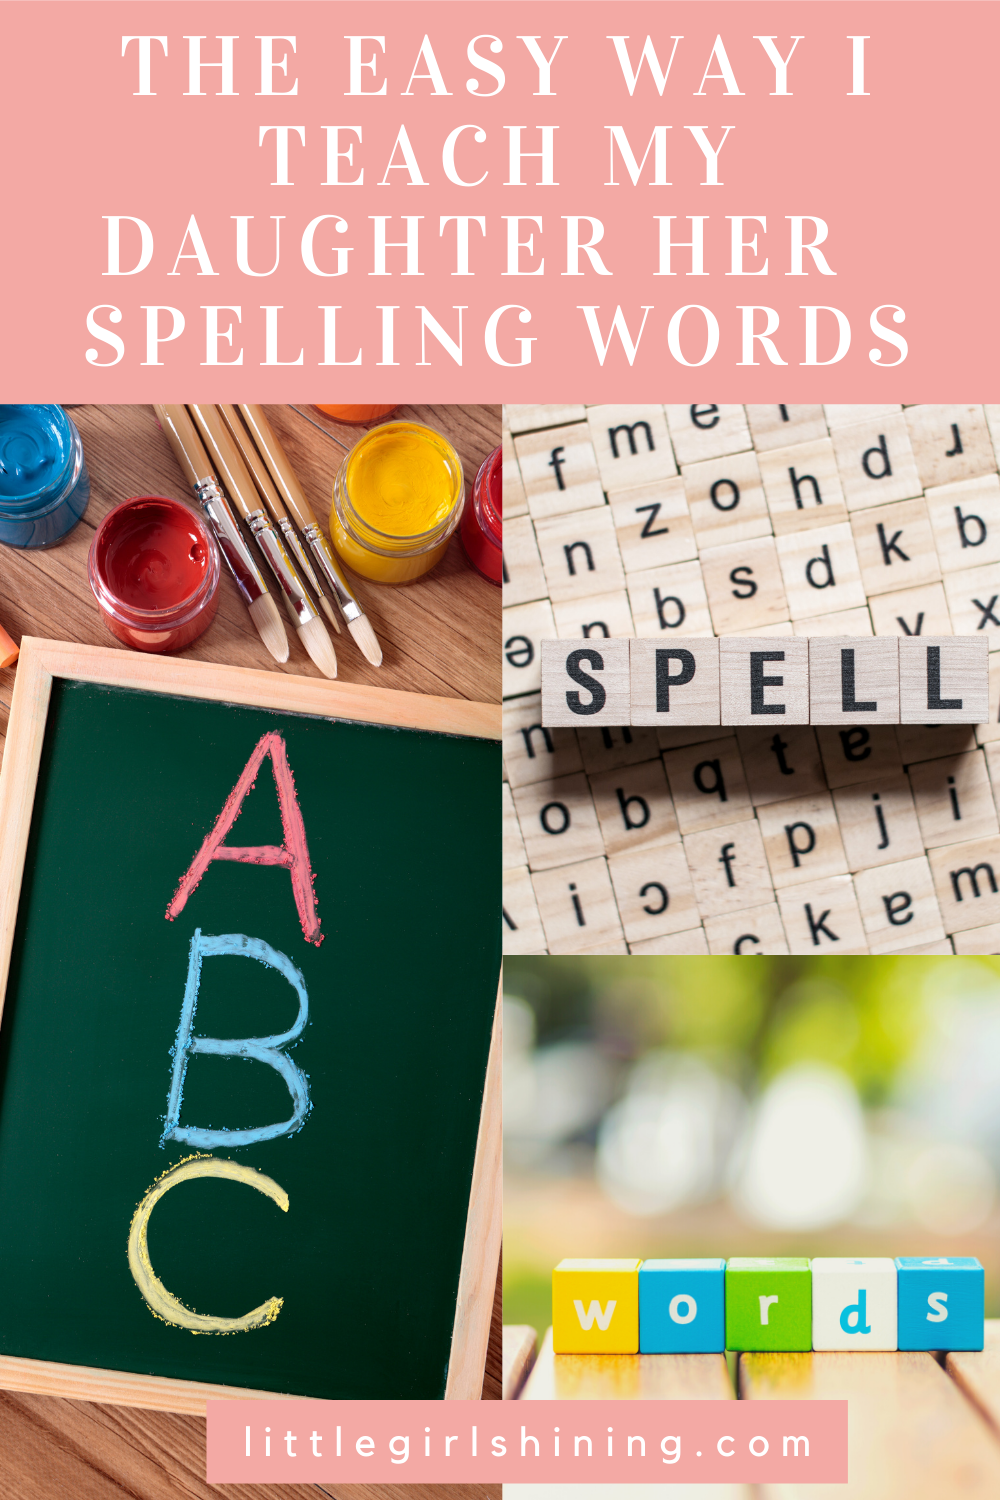 the-easy-way-i-teach-my-daughter-her-spelling-words-little-girl-shining